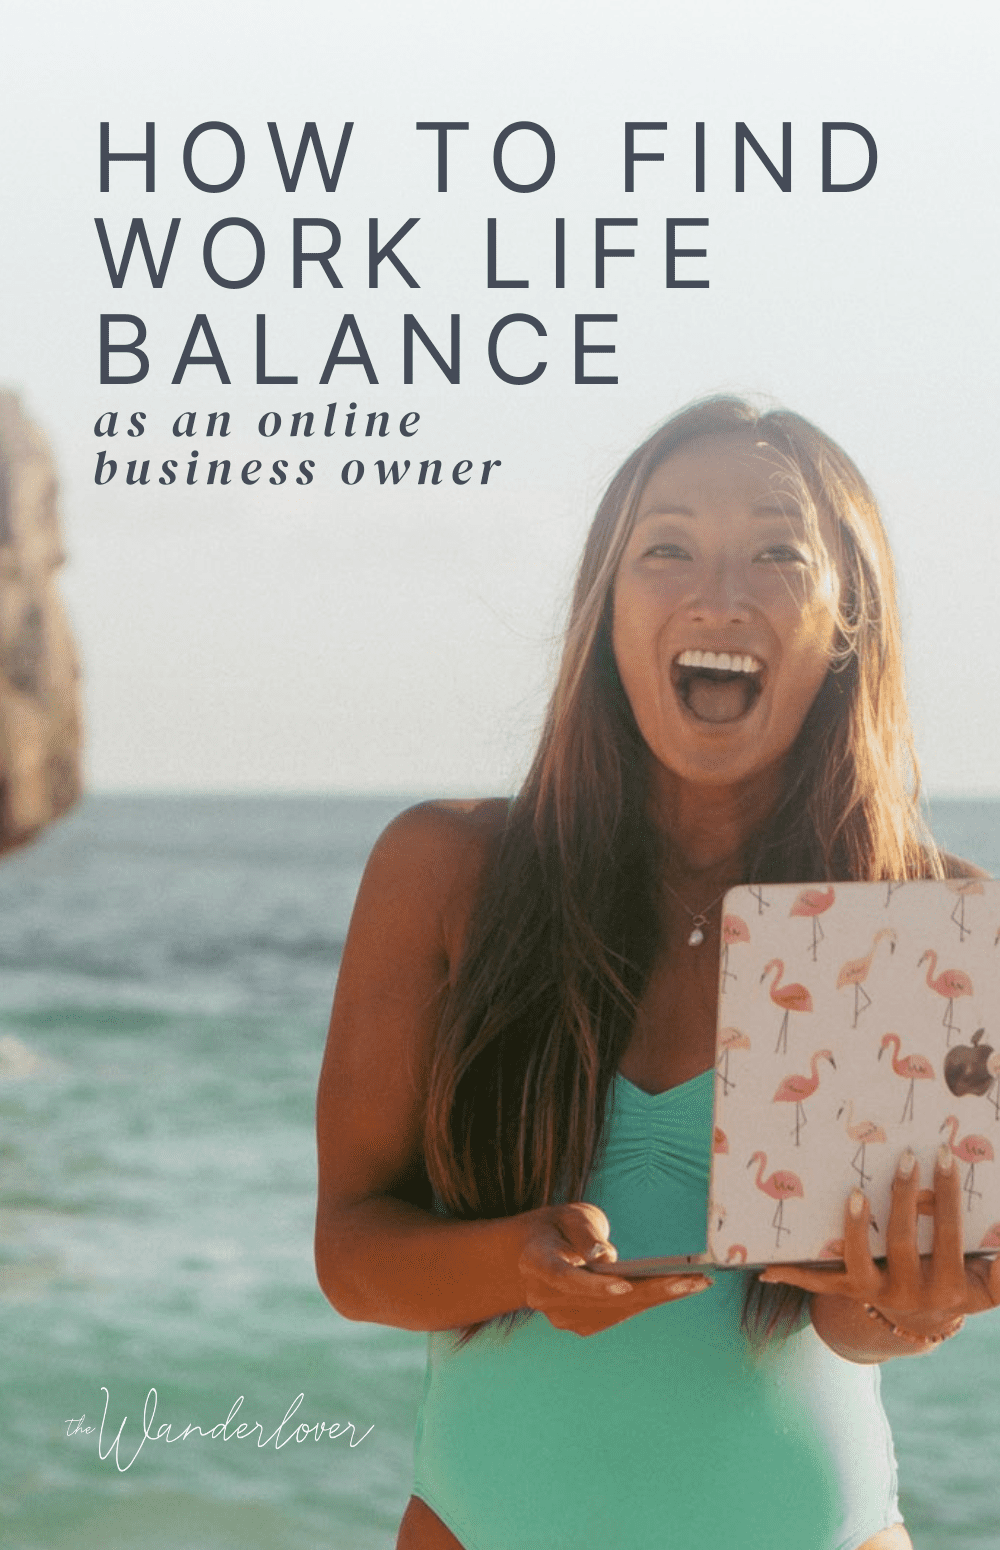 The Importance of a Growth Mindset and a Healthy Work-Life Balance for Online Business Owners